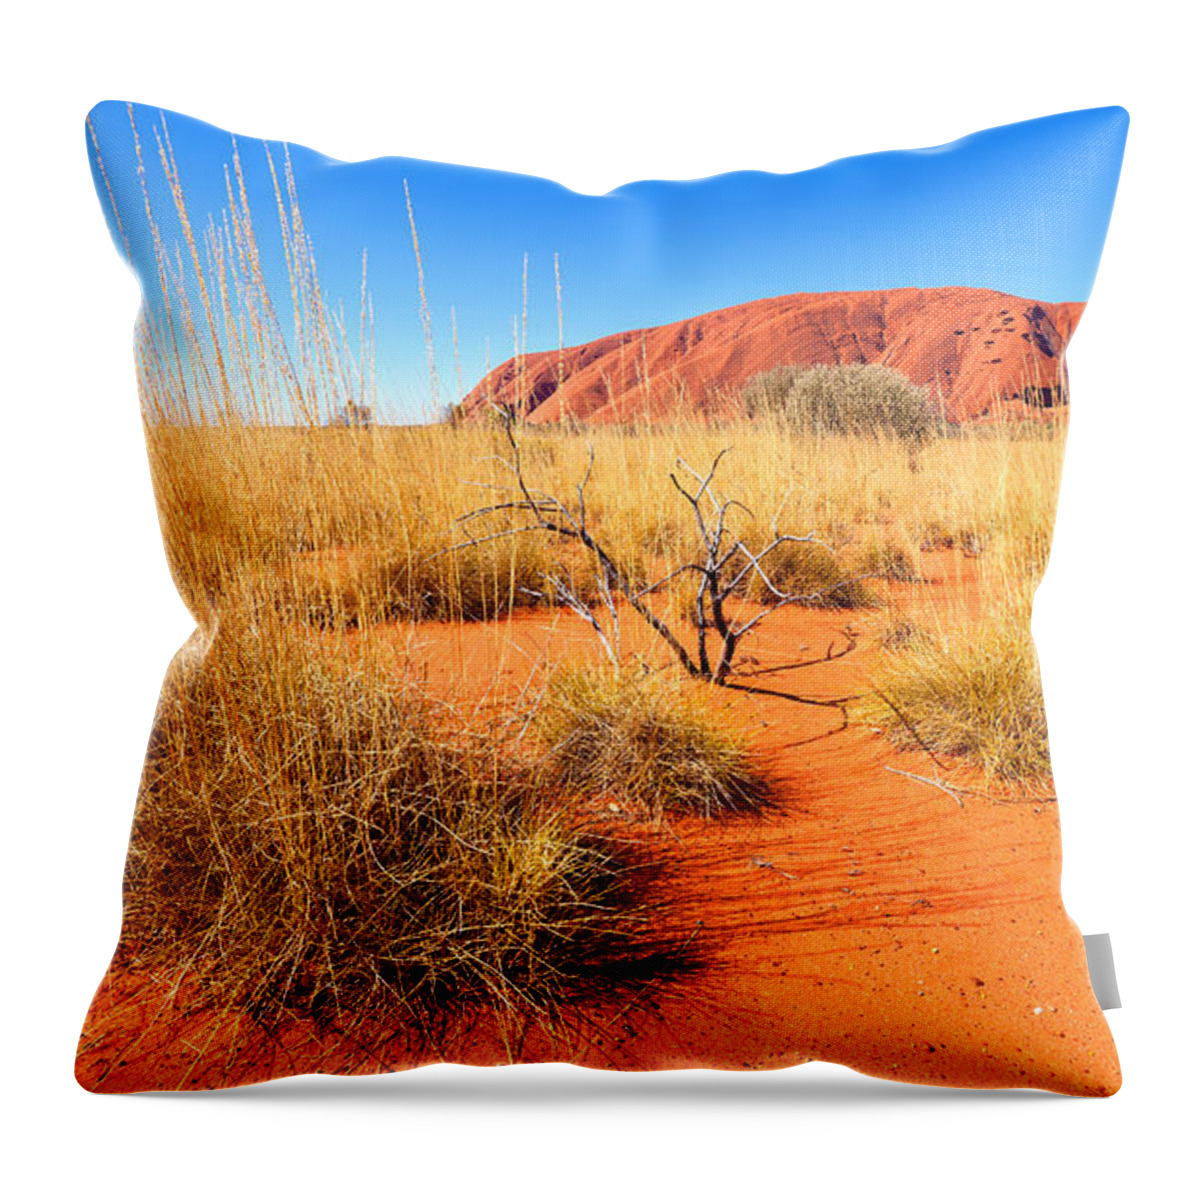 Uluru Ayers Rock Outback Australia Australian Landscape Central Northern Territory Throw Pillow featuring the photograph Central Australia by Bill Robinson